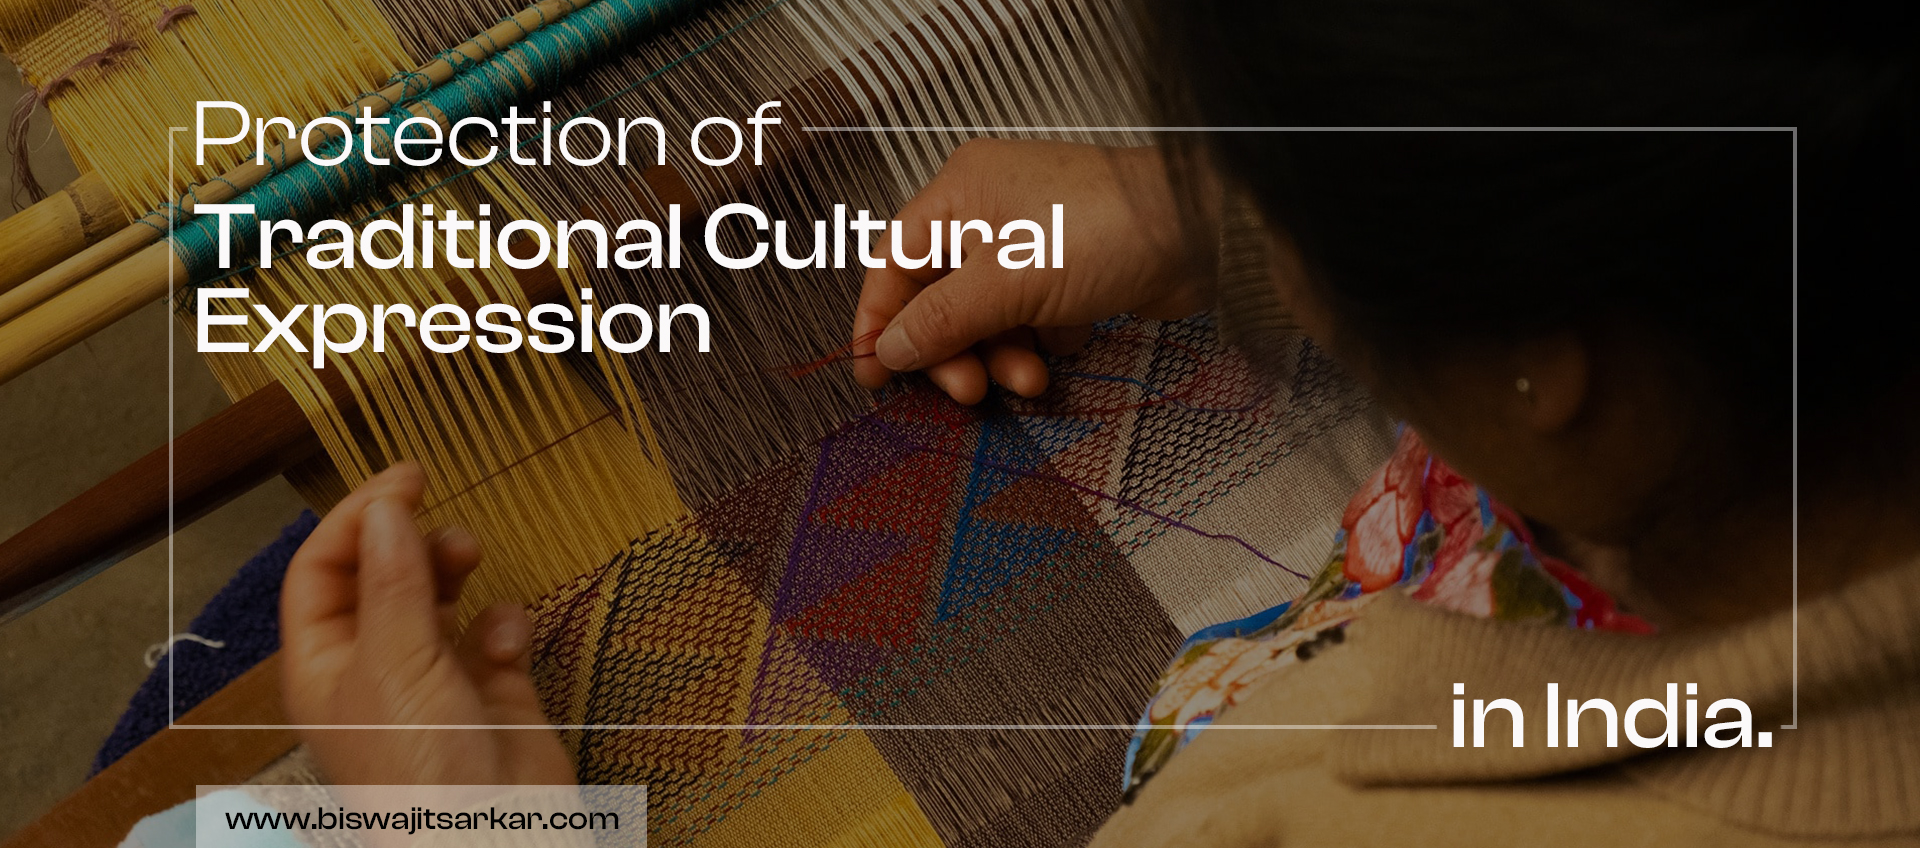 traditional cultural expression protection in India